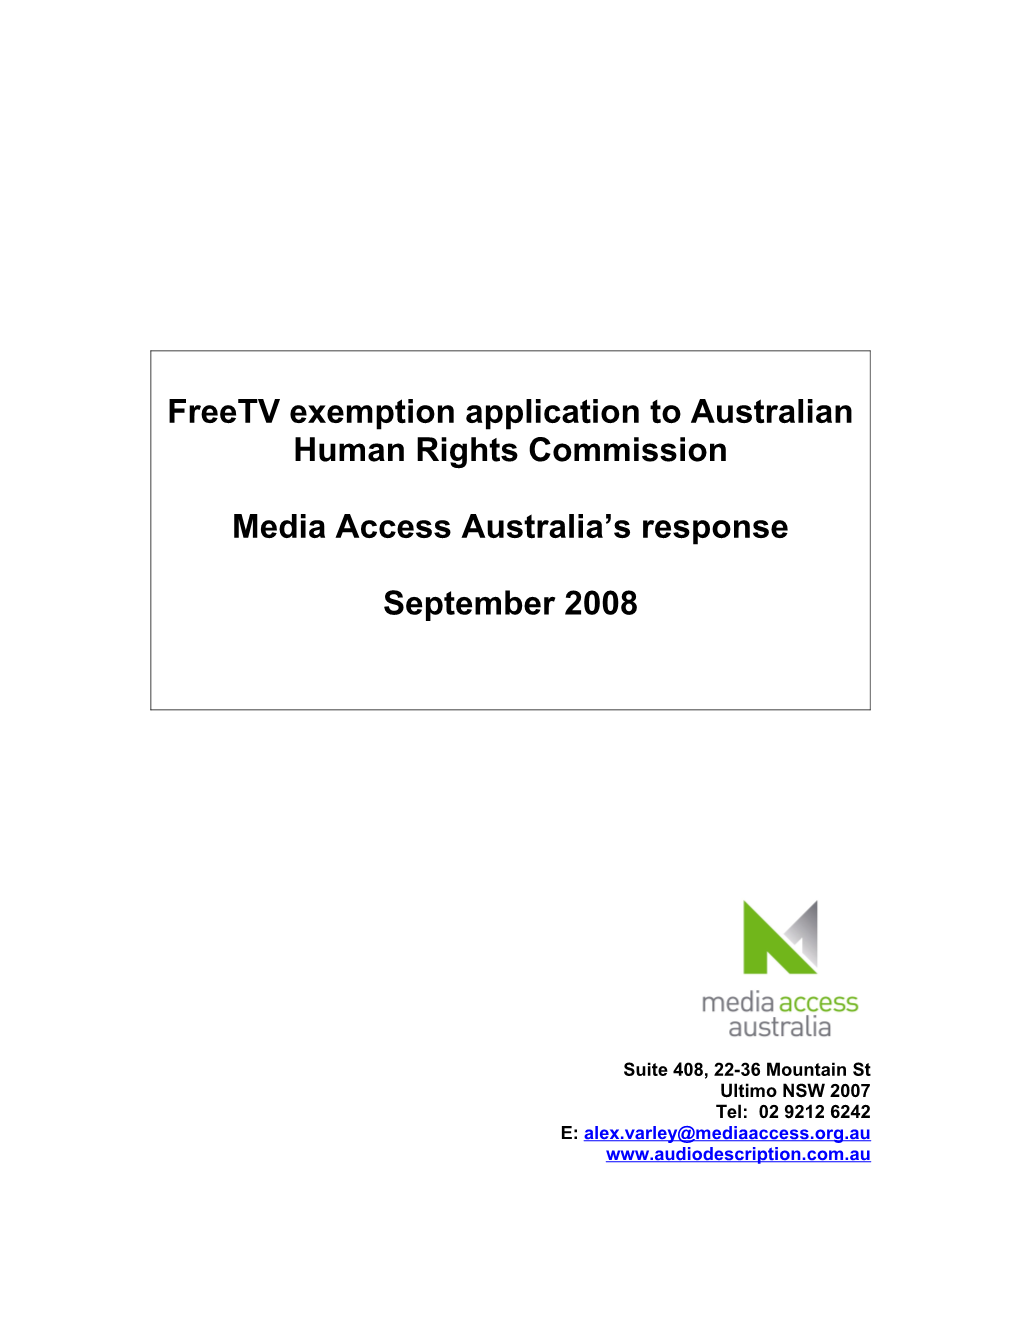 Freetv Are Currently Required to Provide Access Under Two Complementary Schemes